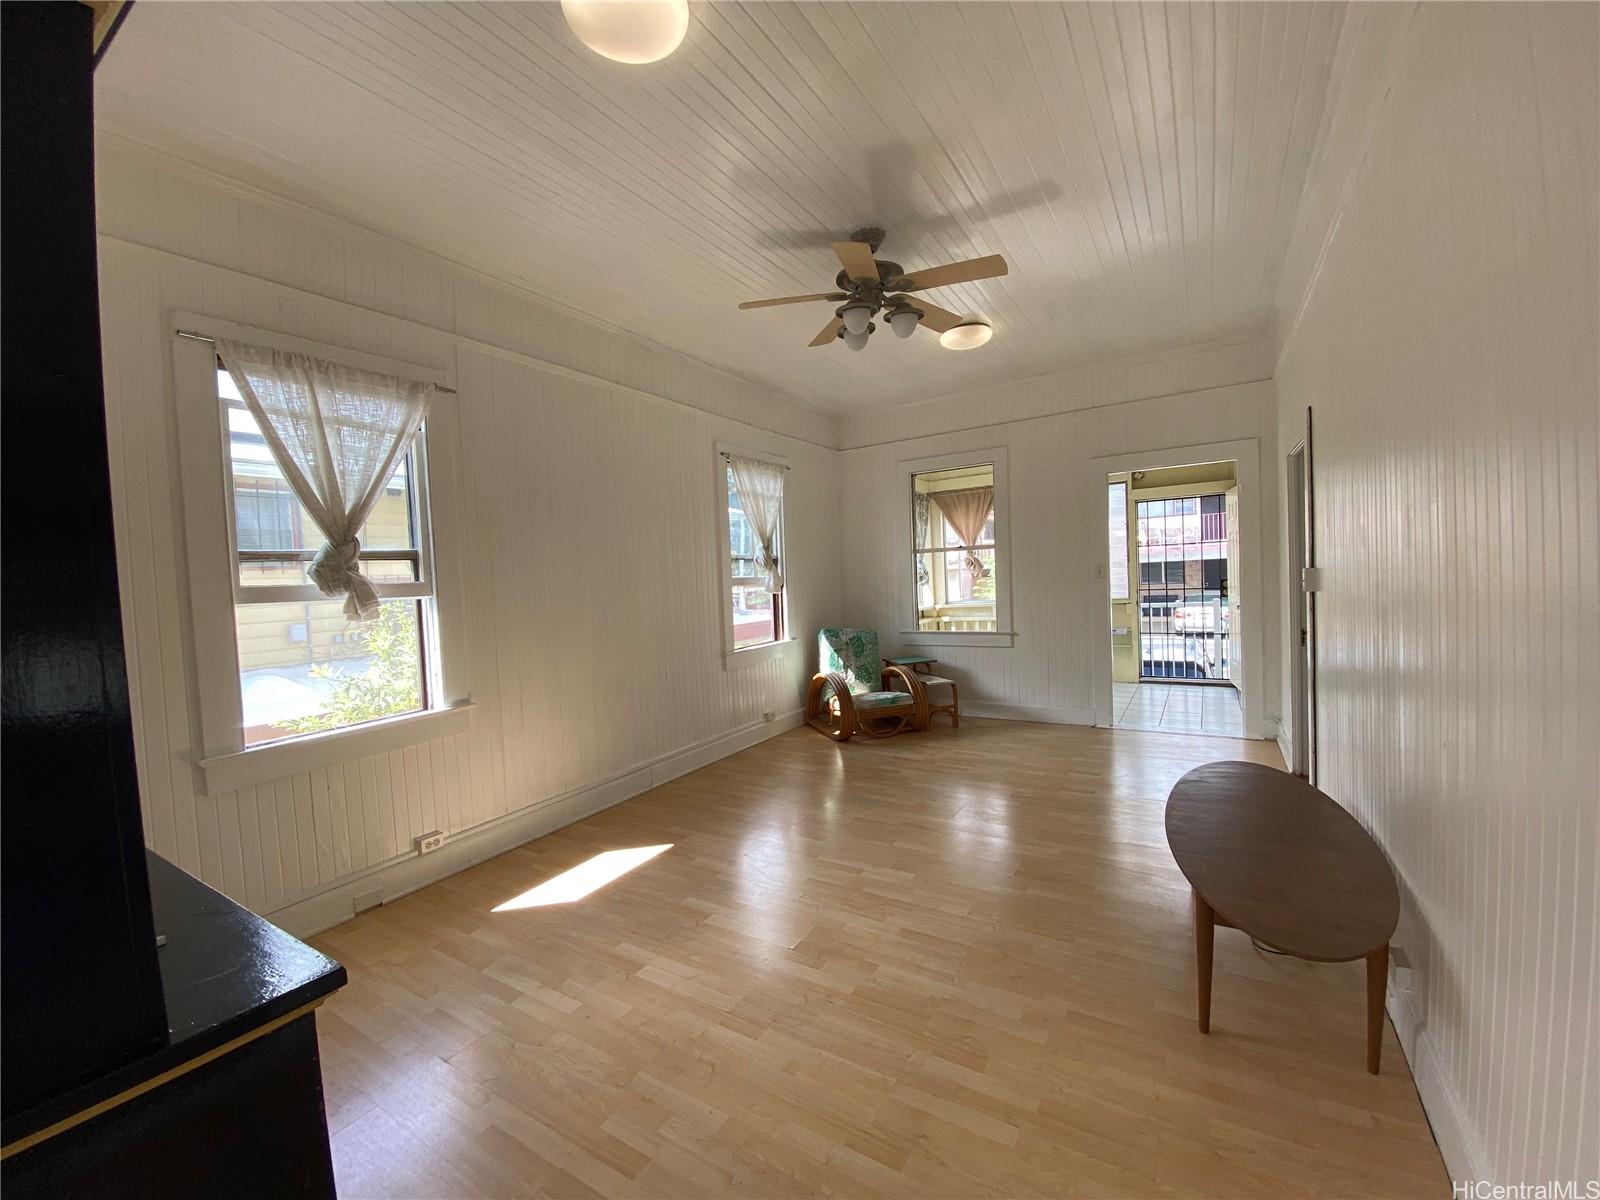 a view of living room with hardwood floor and windows